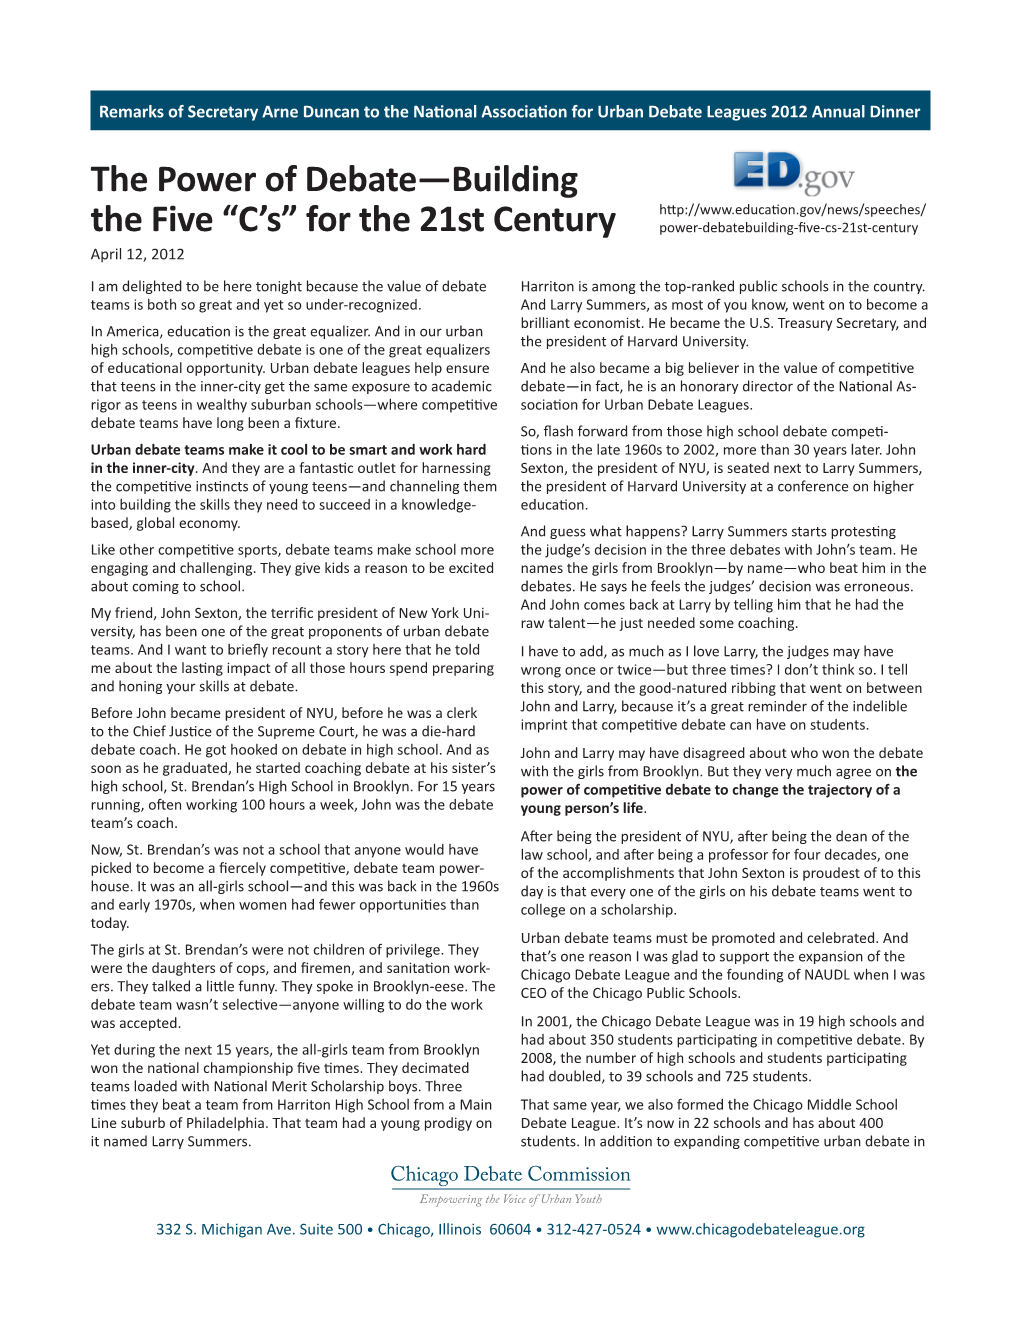 The Power of Debate—Building the Five “C's” for the 21St Century